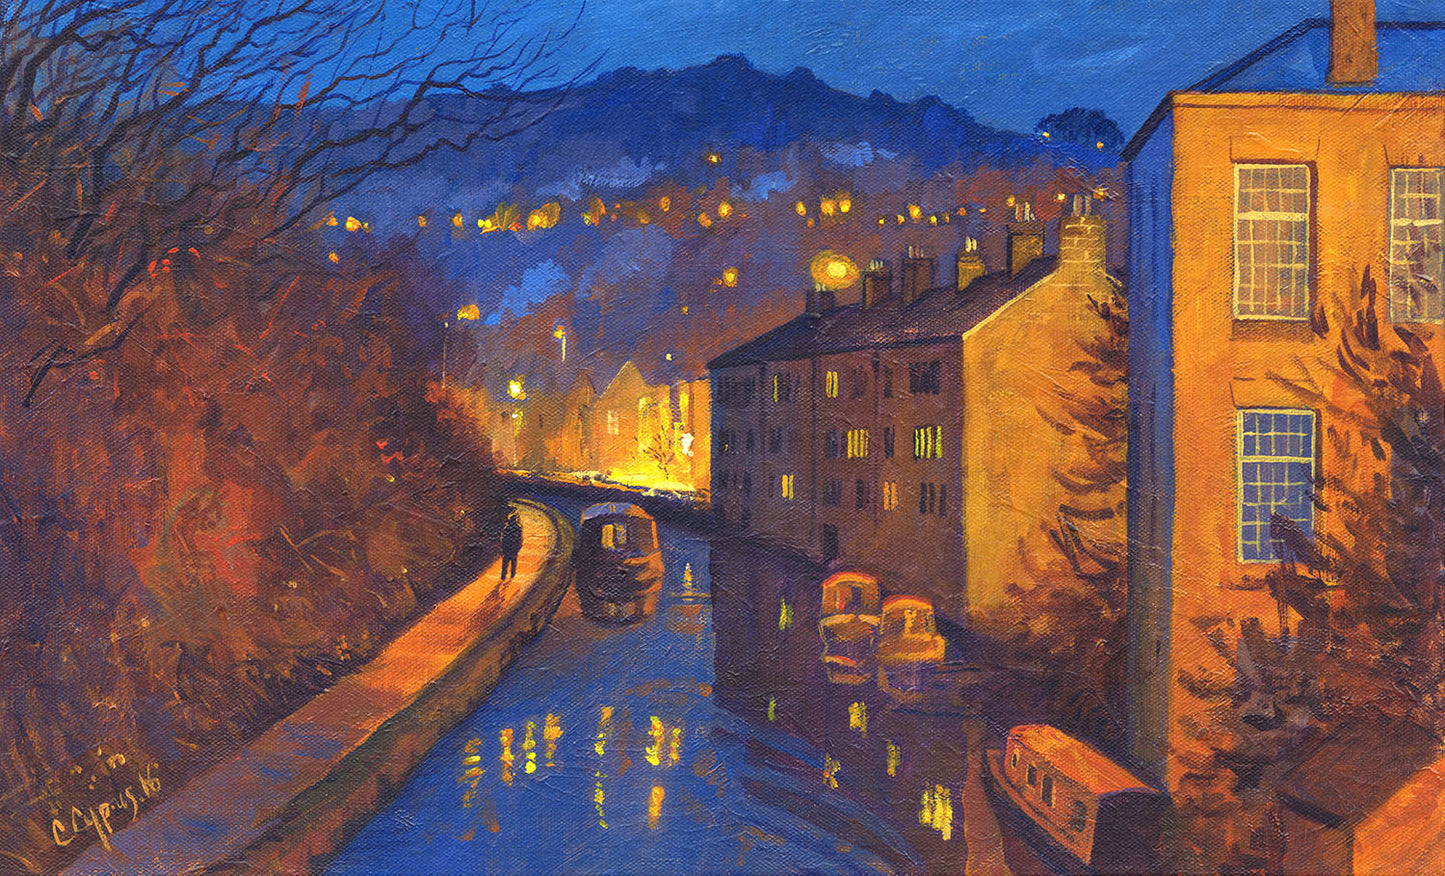 Northern Lights #173 ~ Hebden Bridge Yorkshire~ Limited Edition Gicleé Print ~ By Chris Cyprus Artist